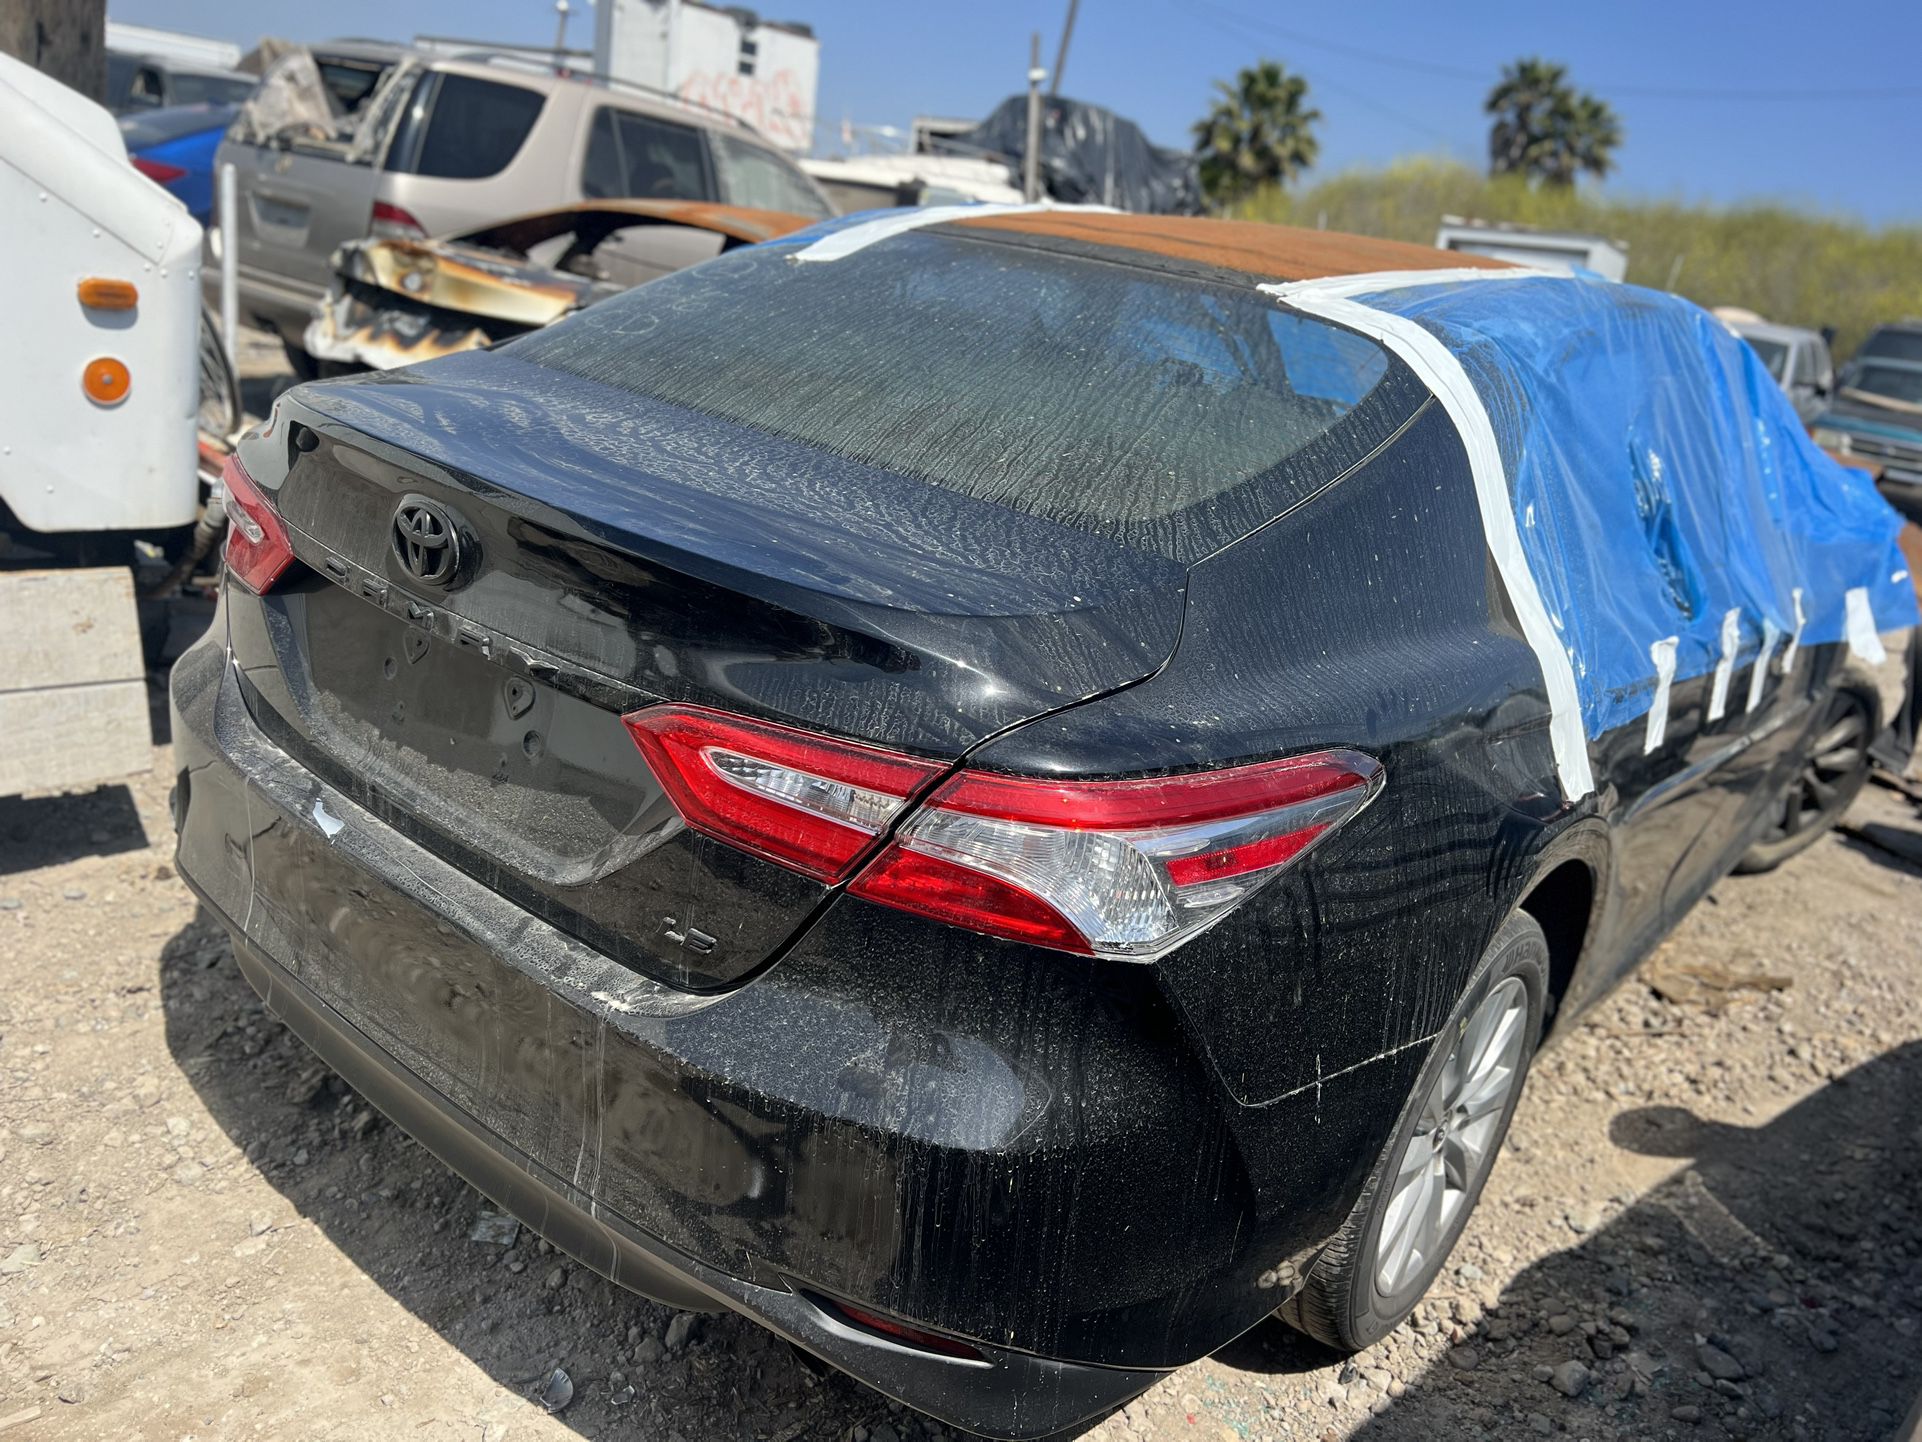 2019 Toyota Camry parts